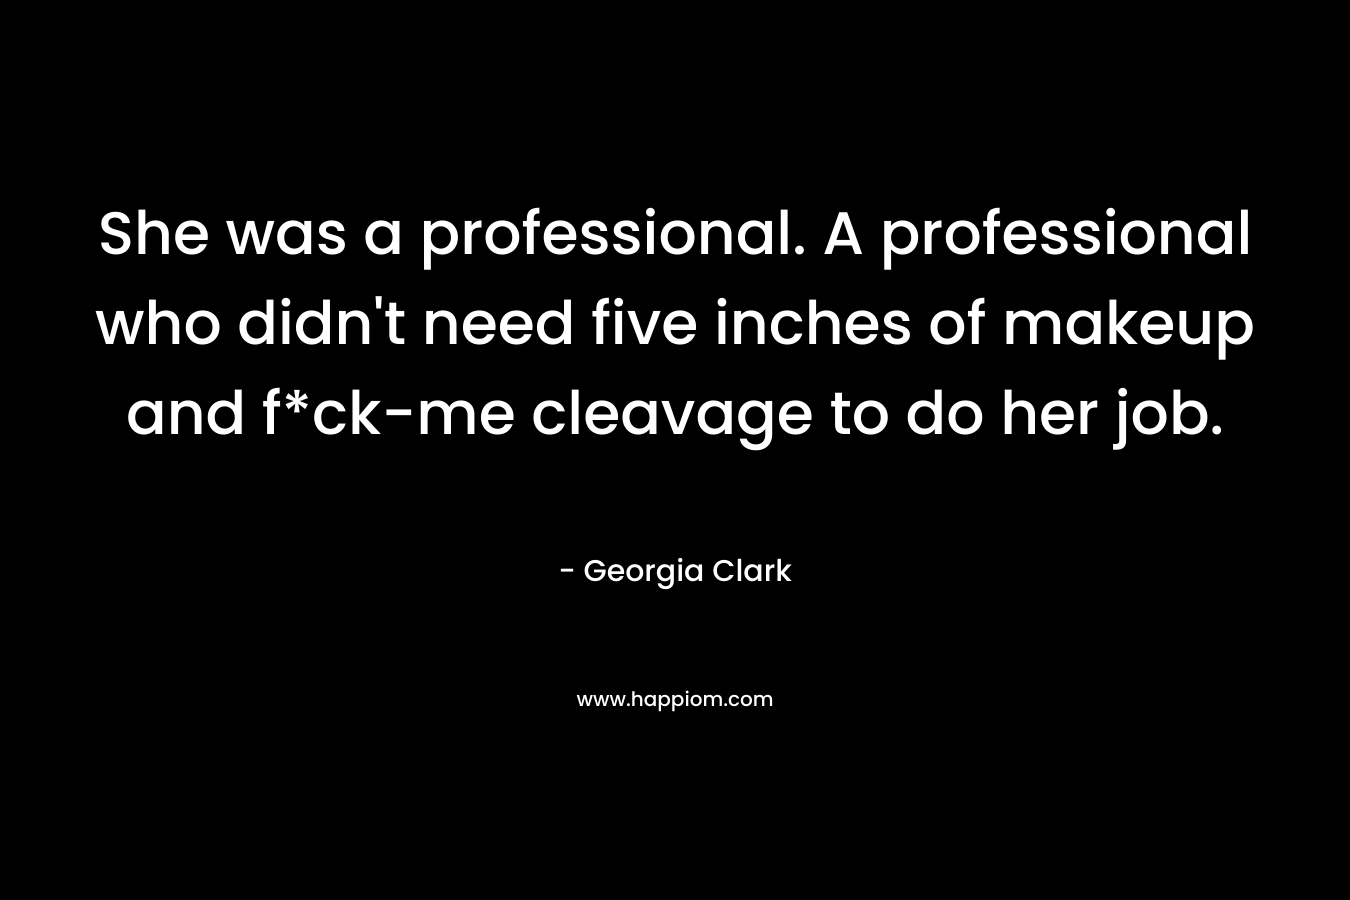 She was a professional. A professional who didn't need five inches of makeup and f*ck-me cleavage to do her job.